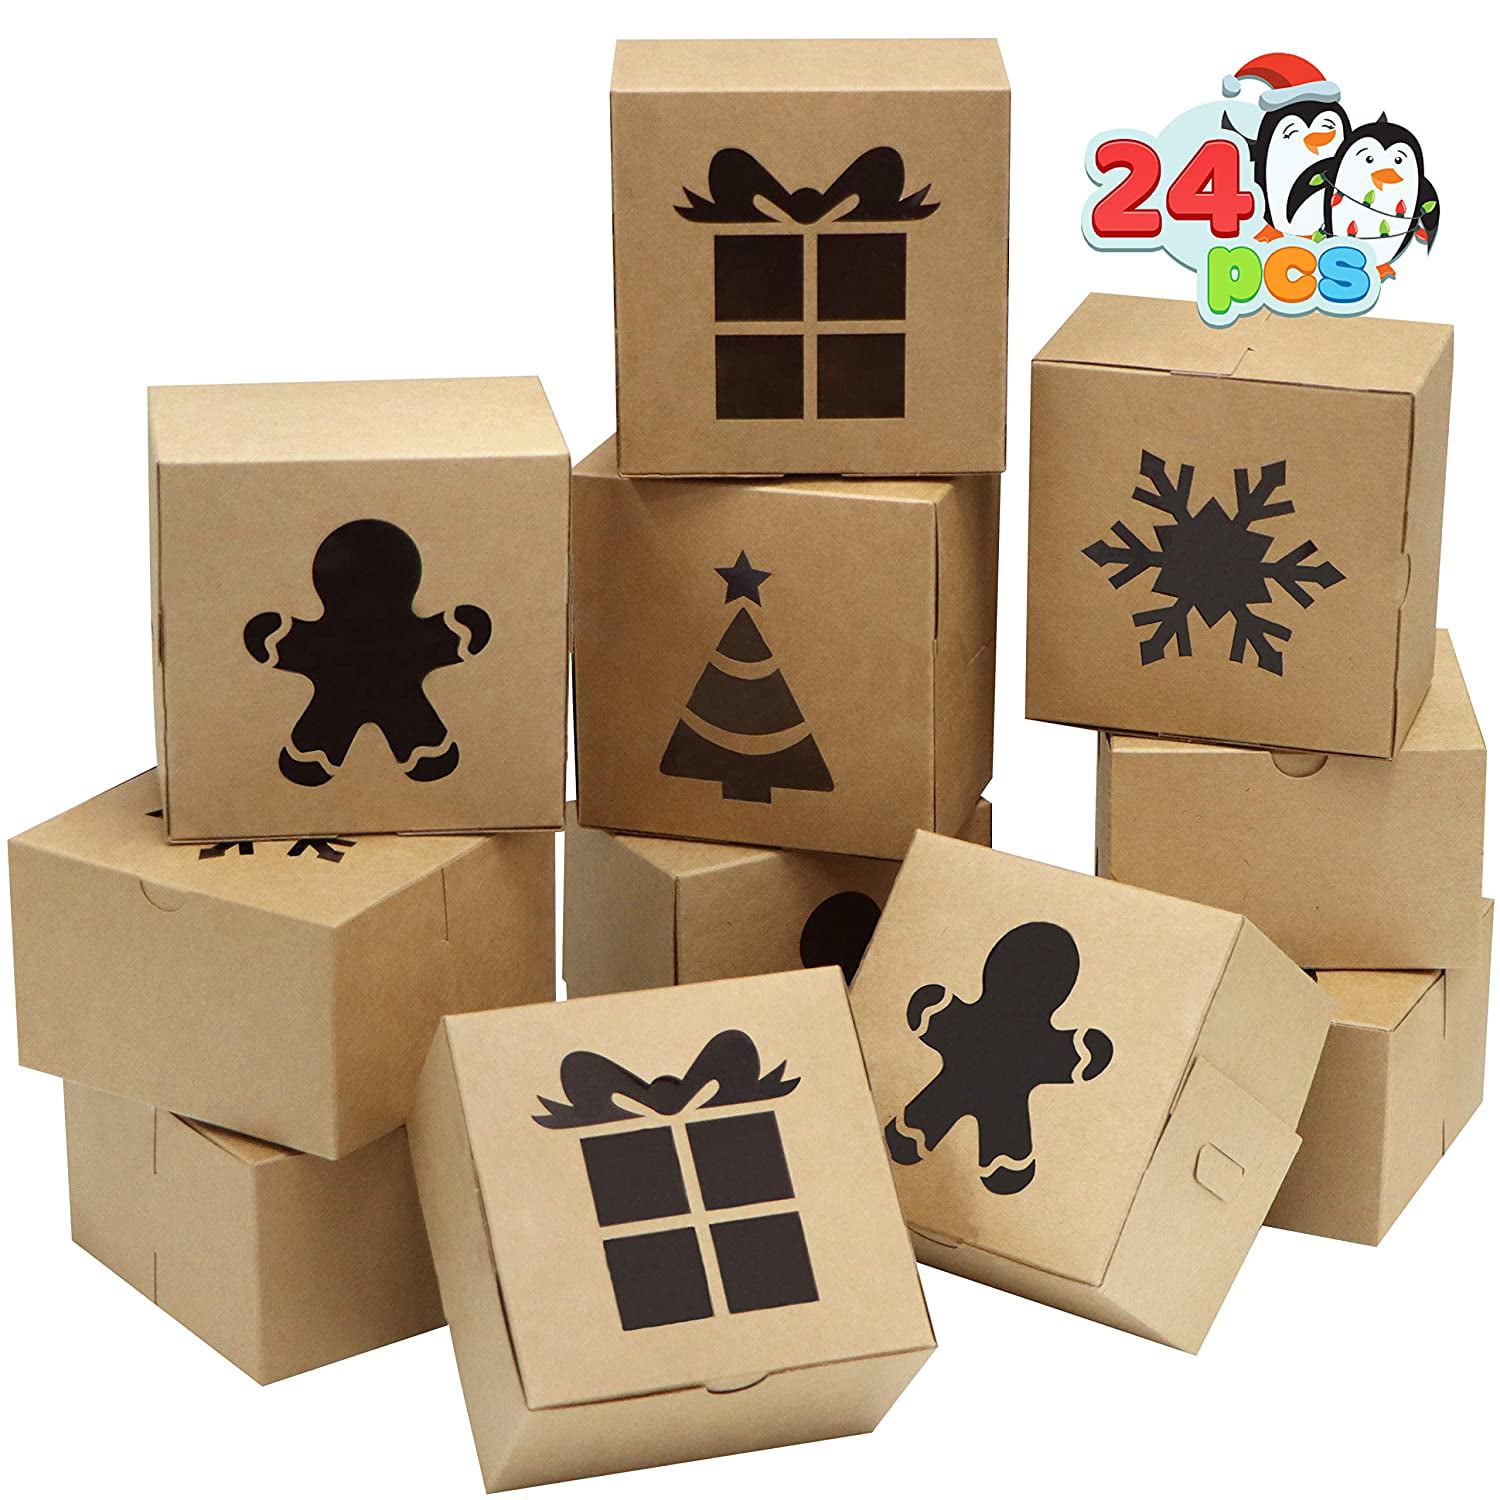 Pastries JOYIN 24 PCs 3D Christmas House Cardboard Treat Boxes for Holiday Treats Cupcakes Brownies Donuts Gift-Giving Goody. 6x 6x3.5 Cookies Goodie